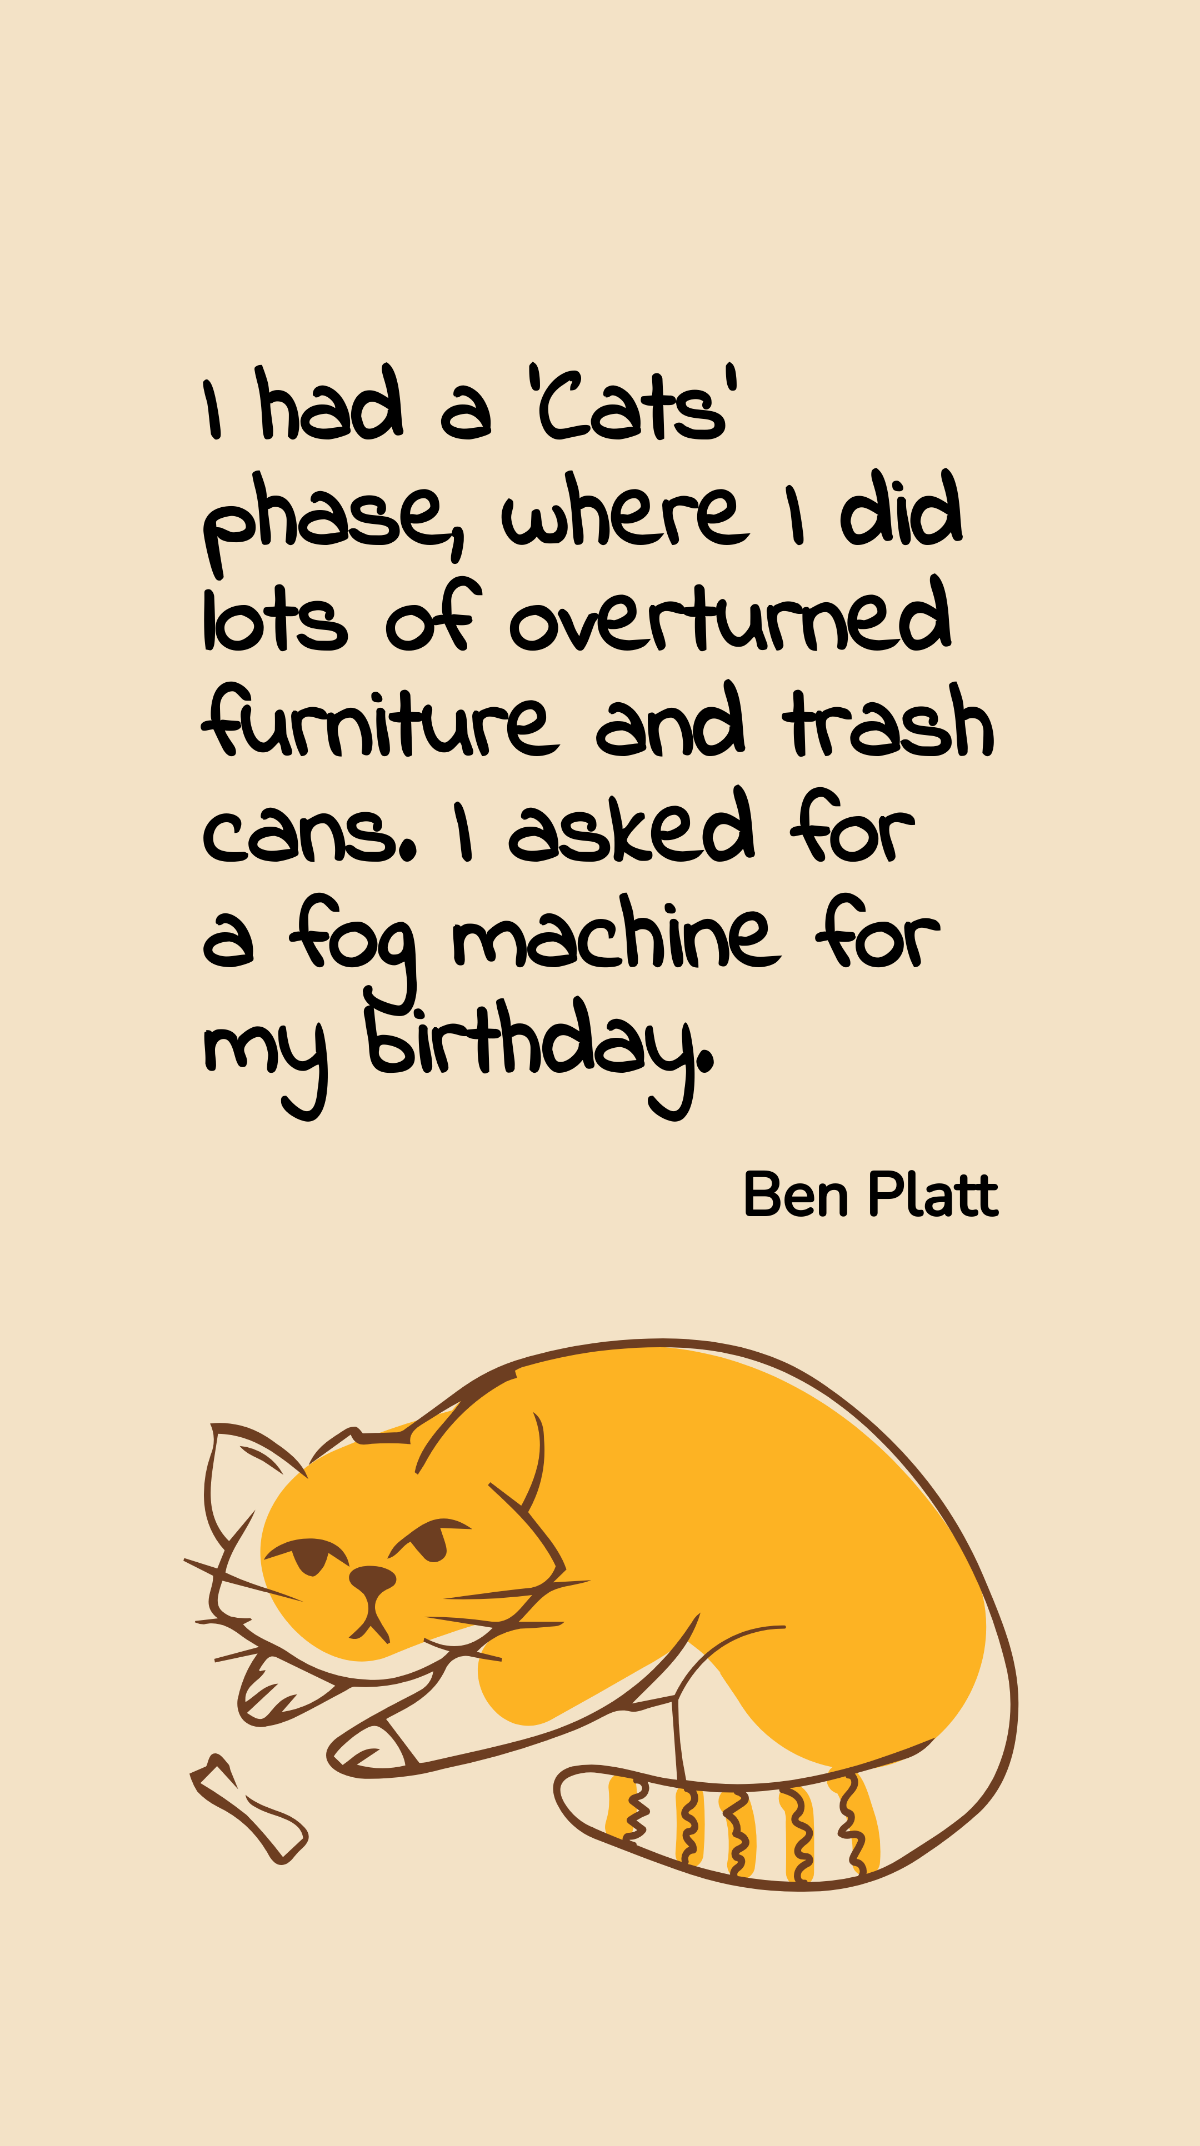 Ben Platt - I had a 'Cats' phase, where I did lots of overturned furniture and trash cans. I asked for a fog machine for my birthday. Template